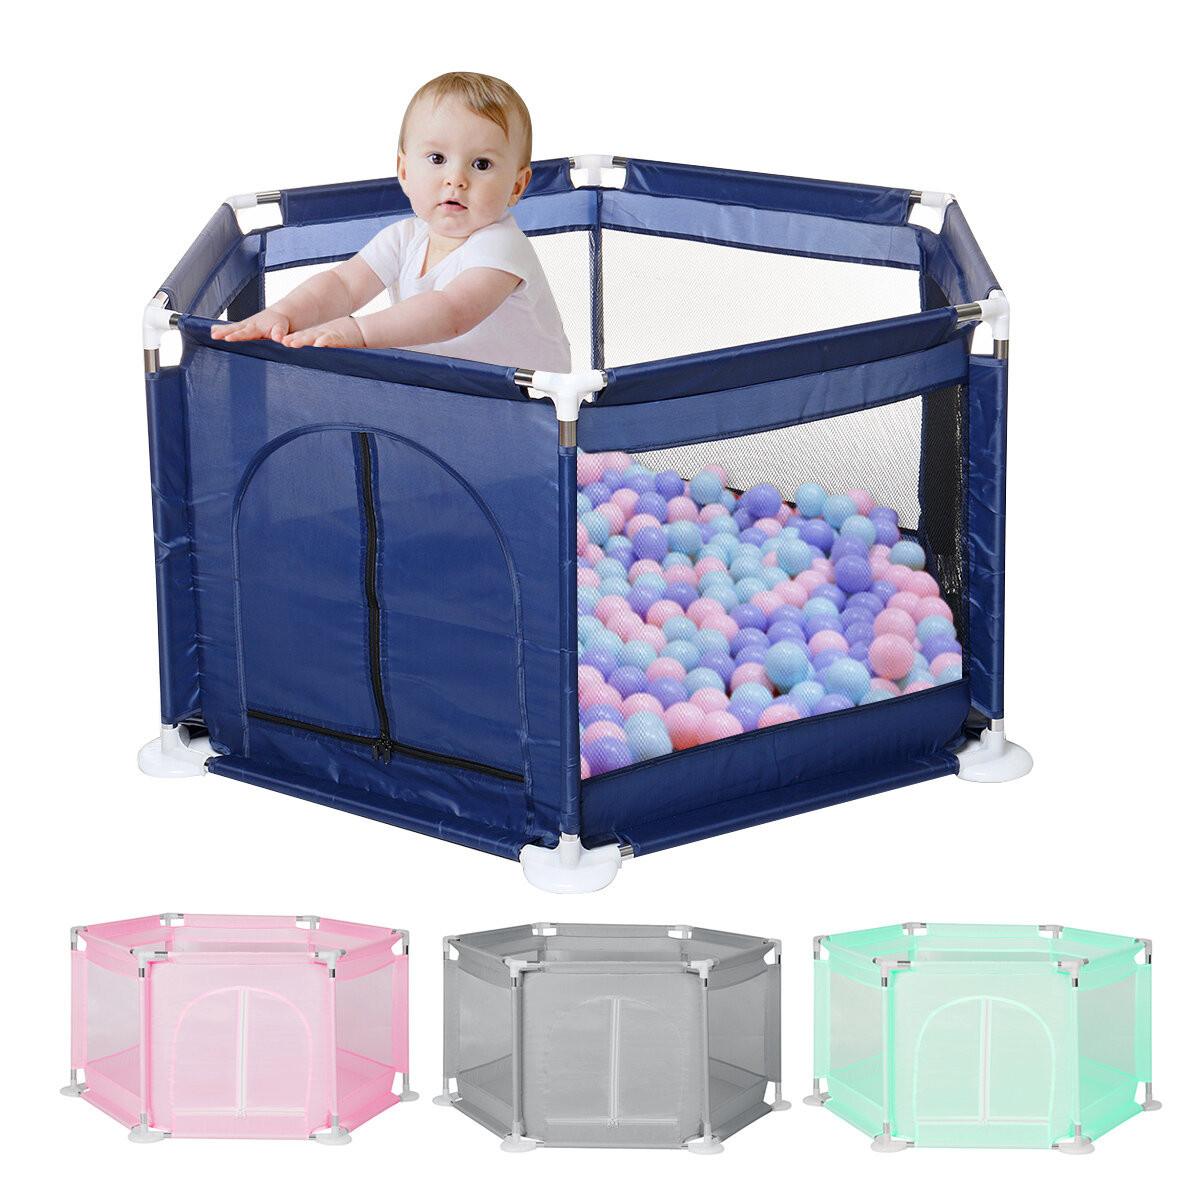 

6 Sided Baby Playpen for Babies Baby Playard Infants Toddler 6 Panels Safety Folding Indoor Outdoor Kids Play Pens Baby